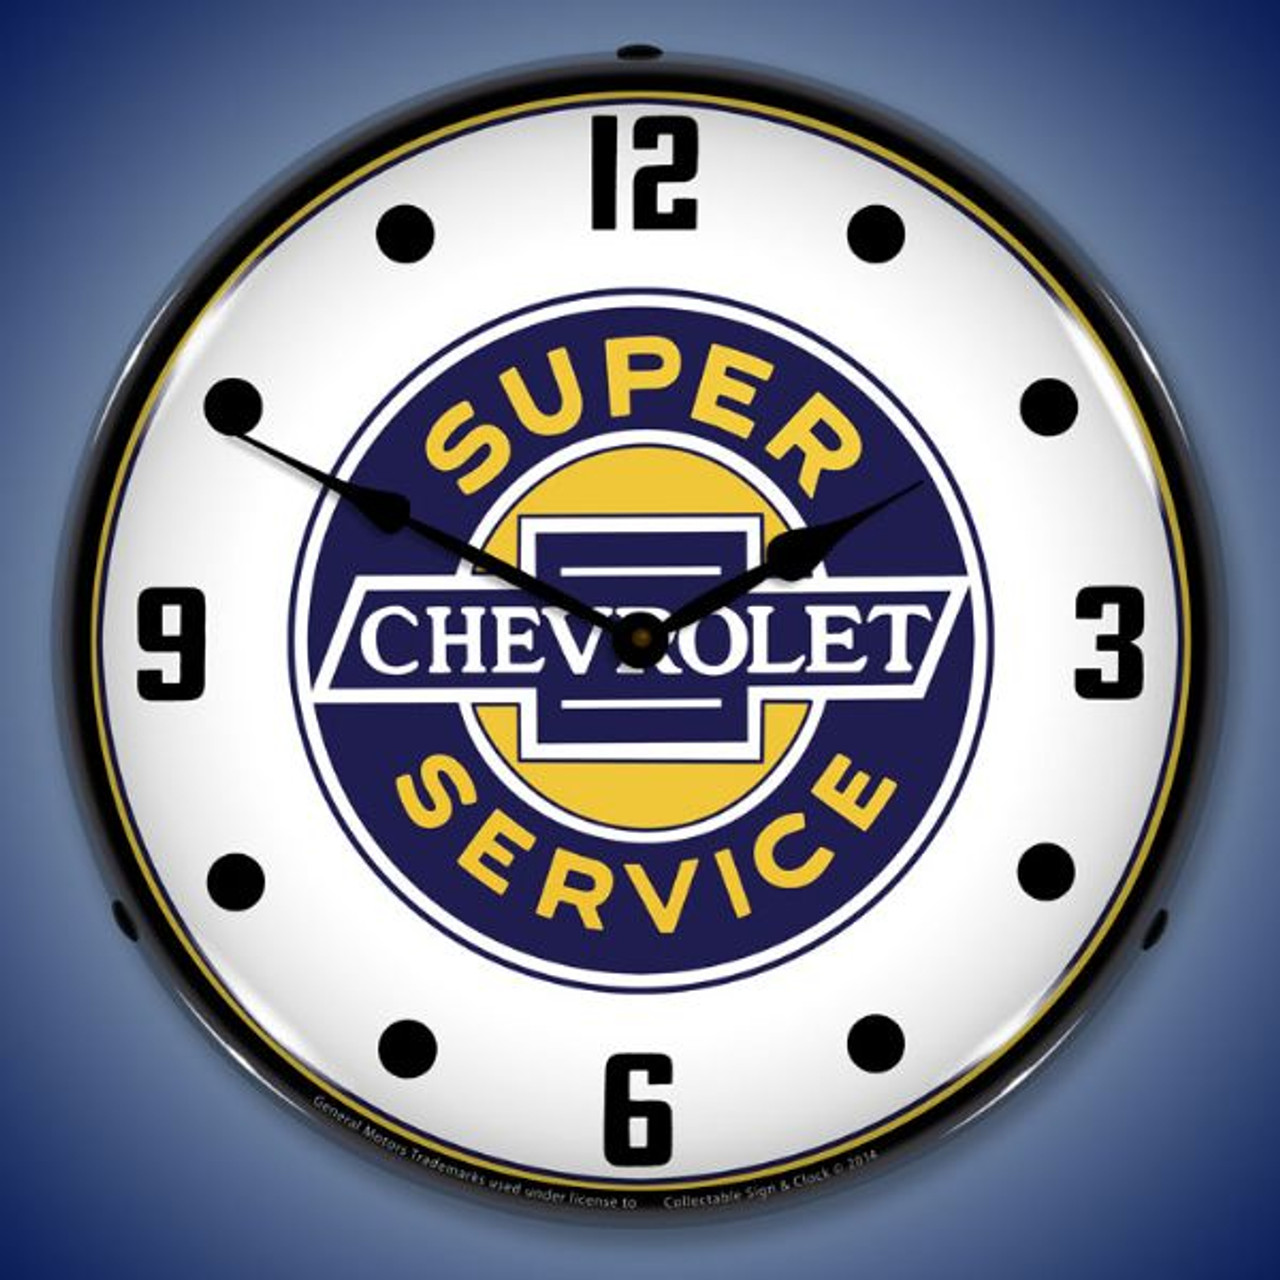 Chevrolet Super Service Lighted Wall Clock 14 x 14 Inches